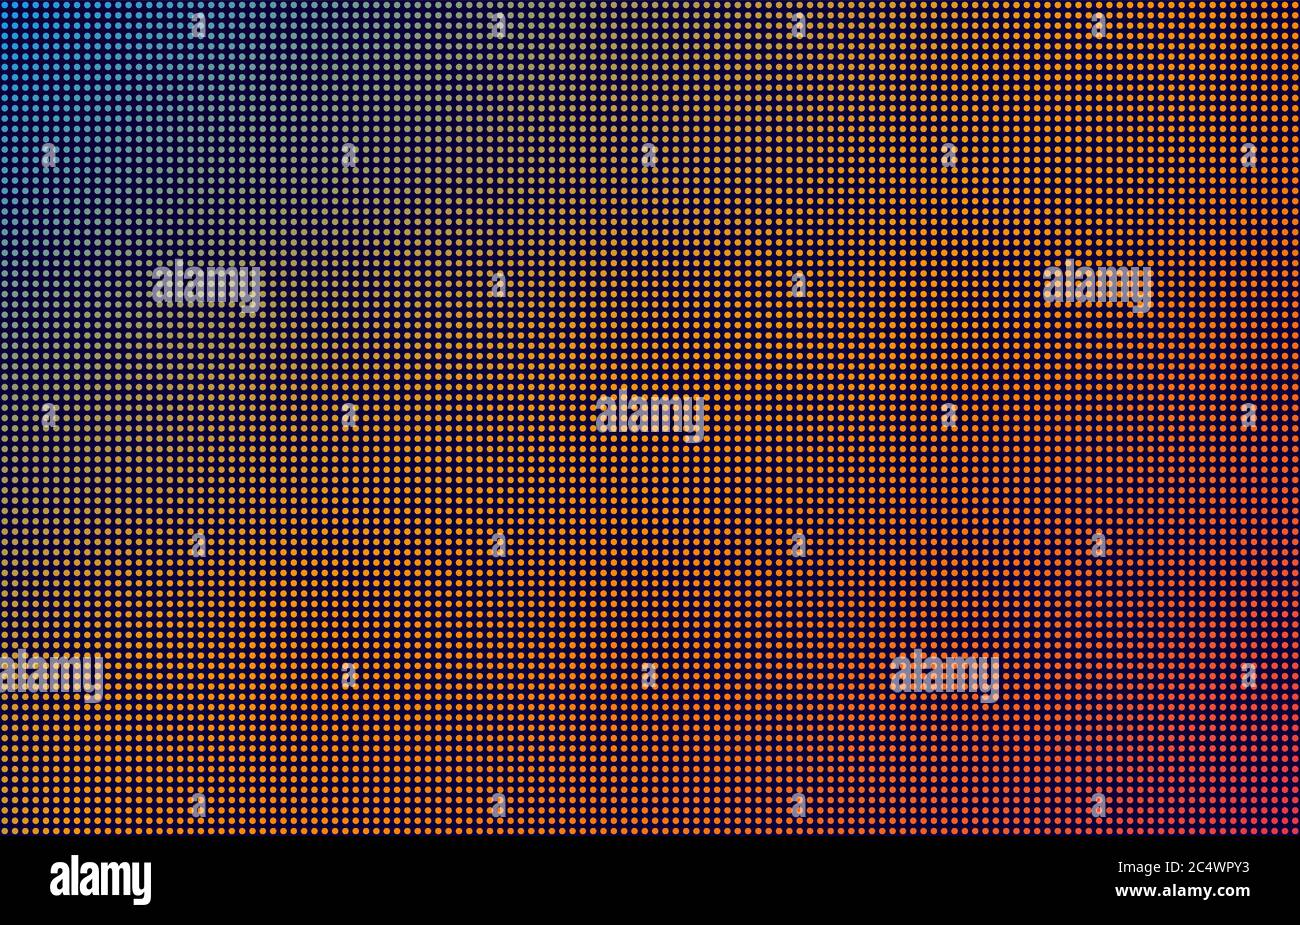 LED screen gradient background, blue, orange and pink monitor dots. Close-up of the macrotexture of the display. Stock Vector